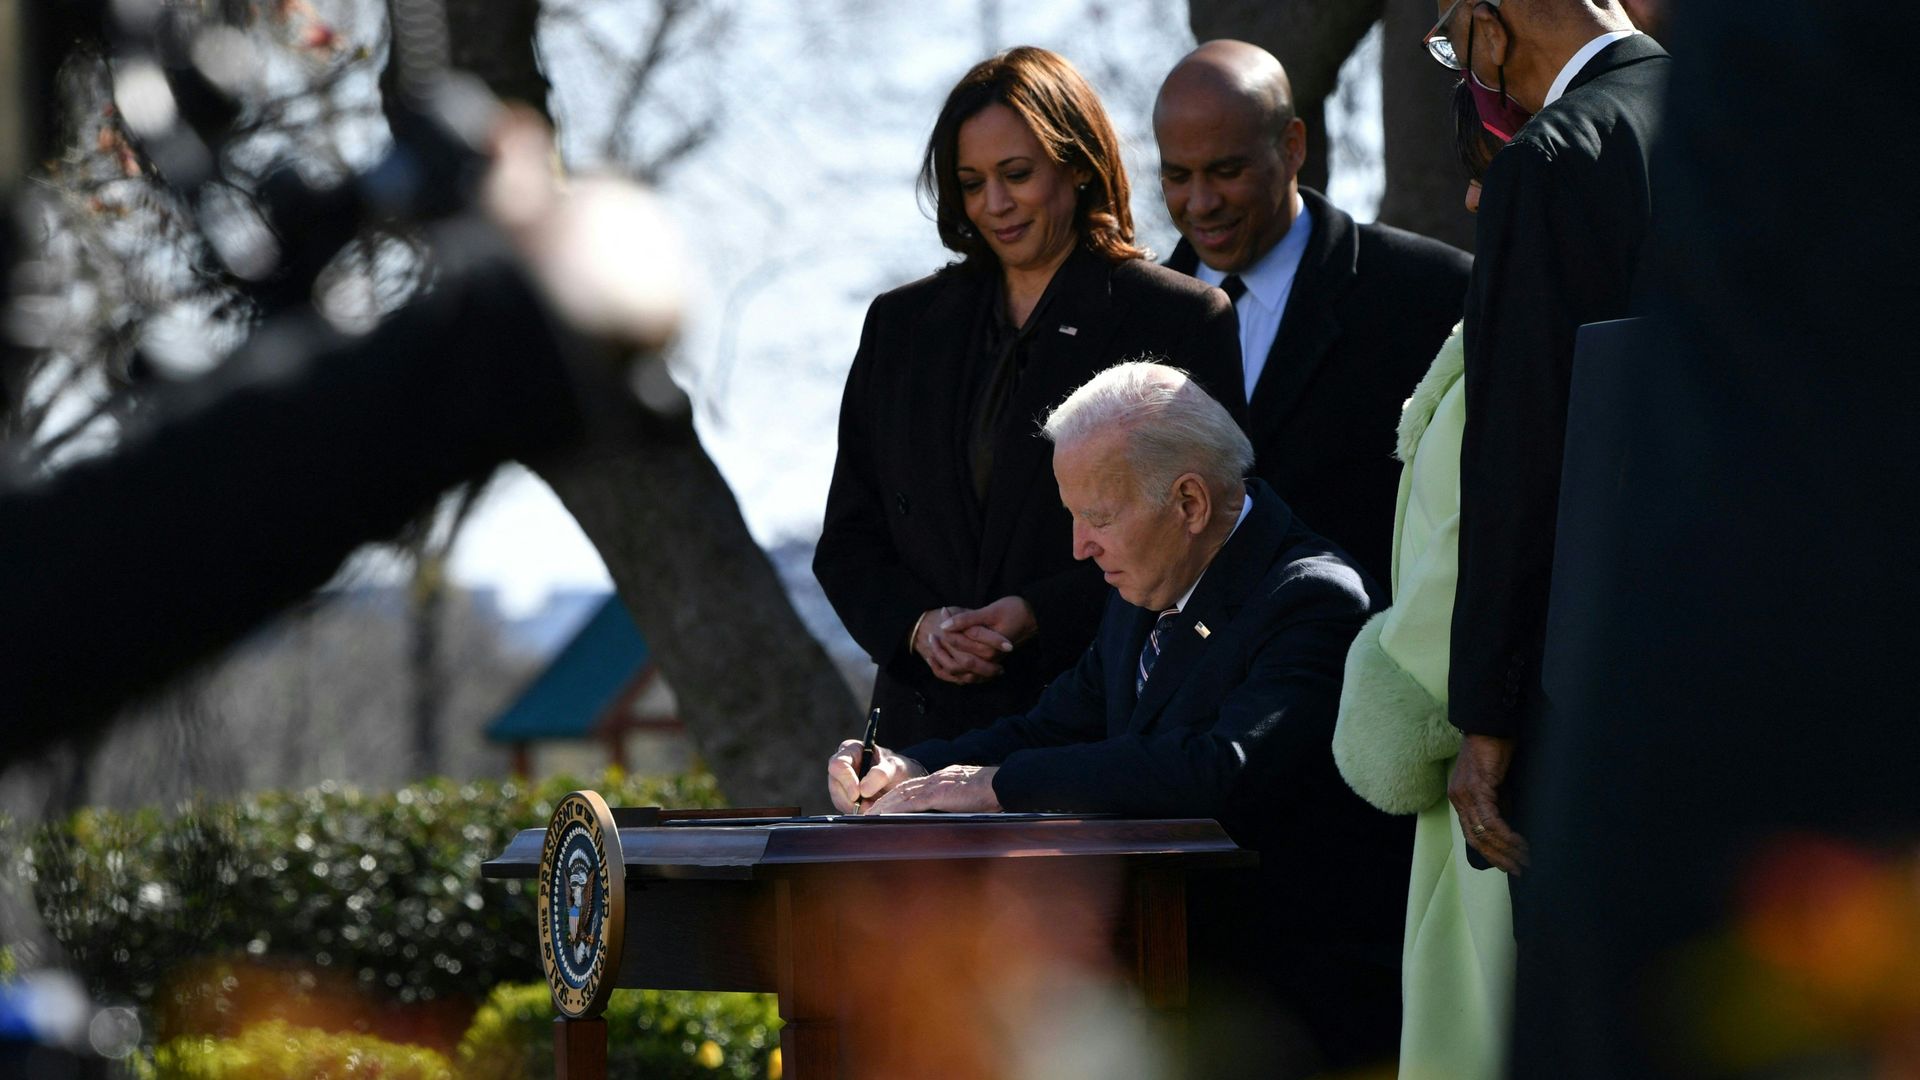 Photo of Joe Biden signing a piece of paper outside the White House with people watching him